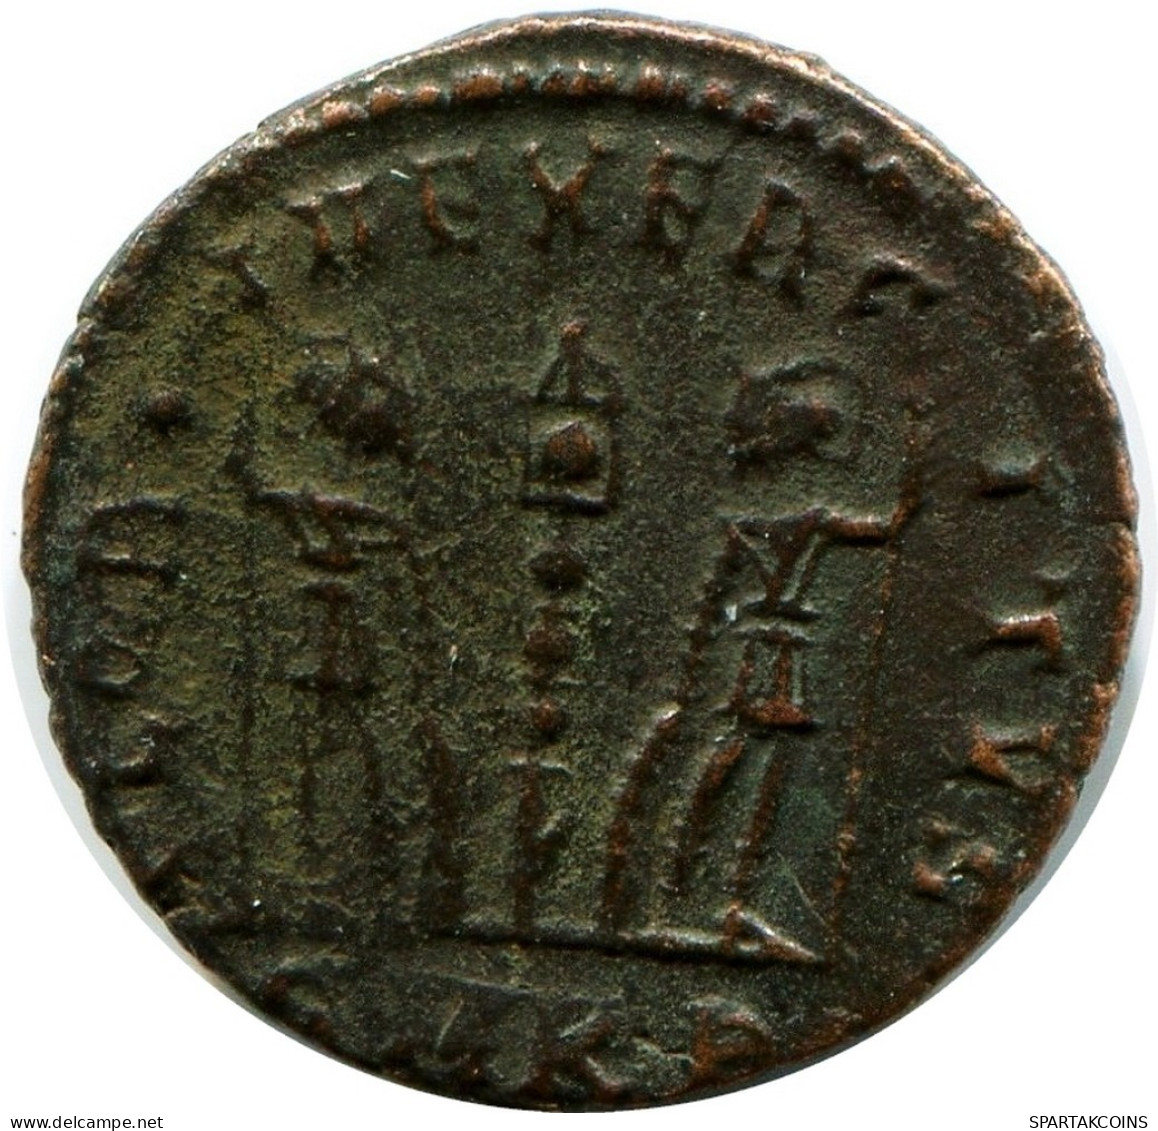 CONSTANS MINTED IN CYZICUS FROM THE ROYAL ONTARIO MUSEUM #ANC11663.14.F.A - El Impero Christiano (307 / 363)